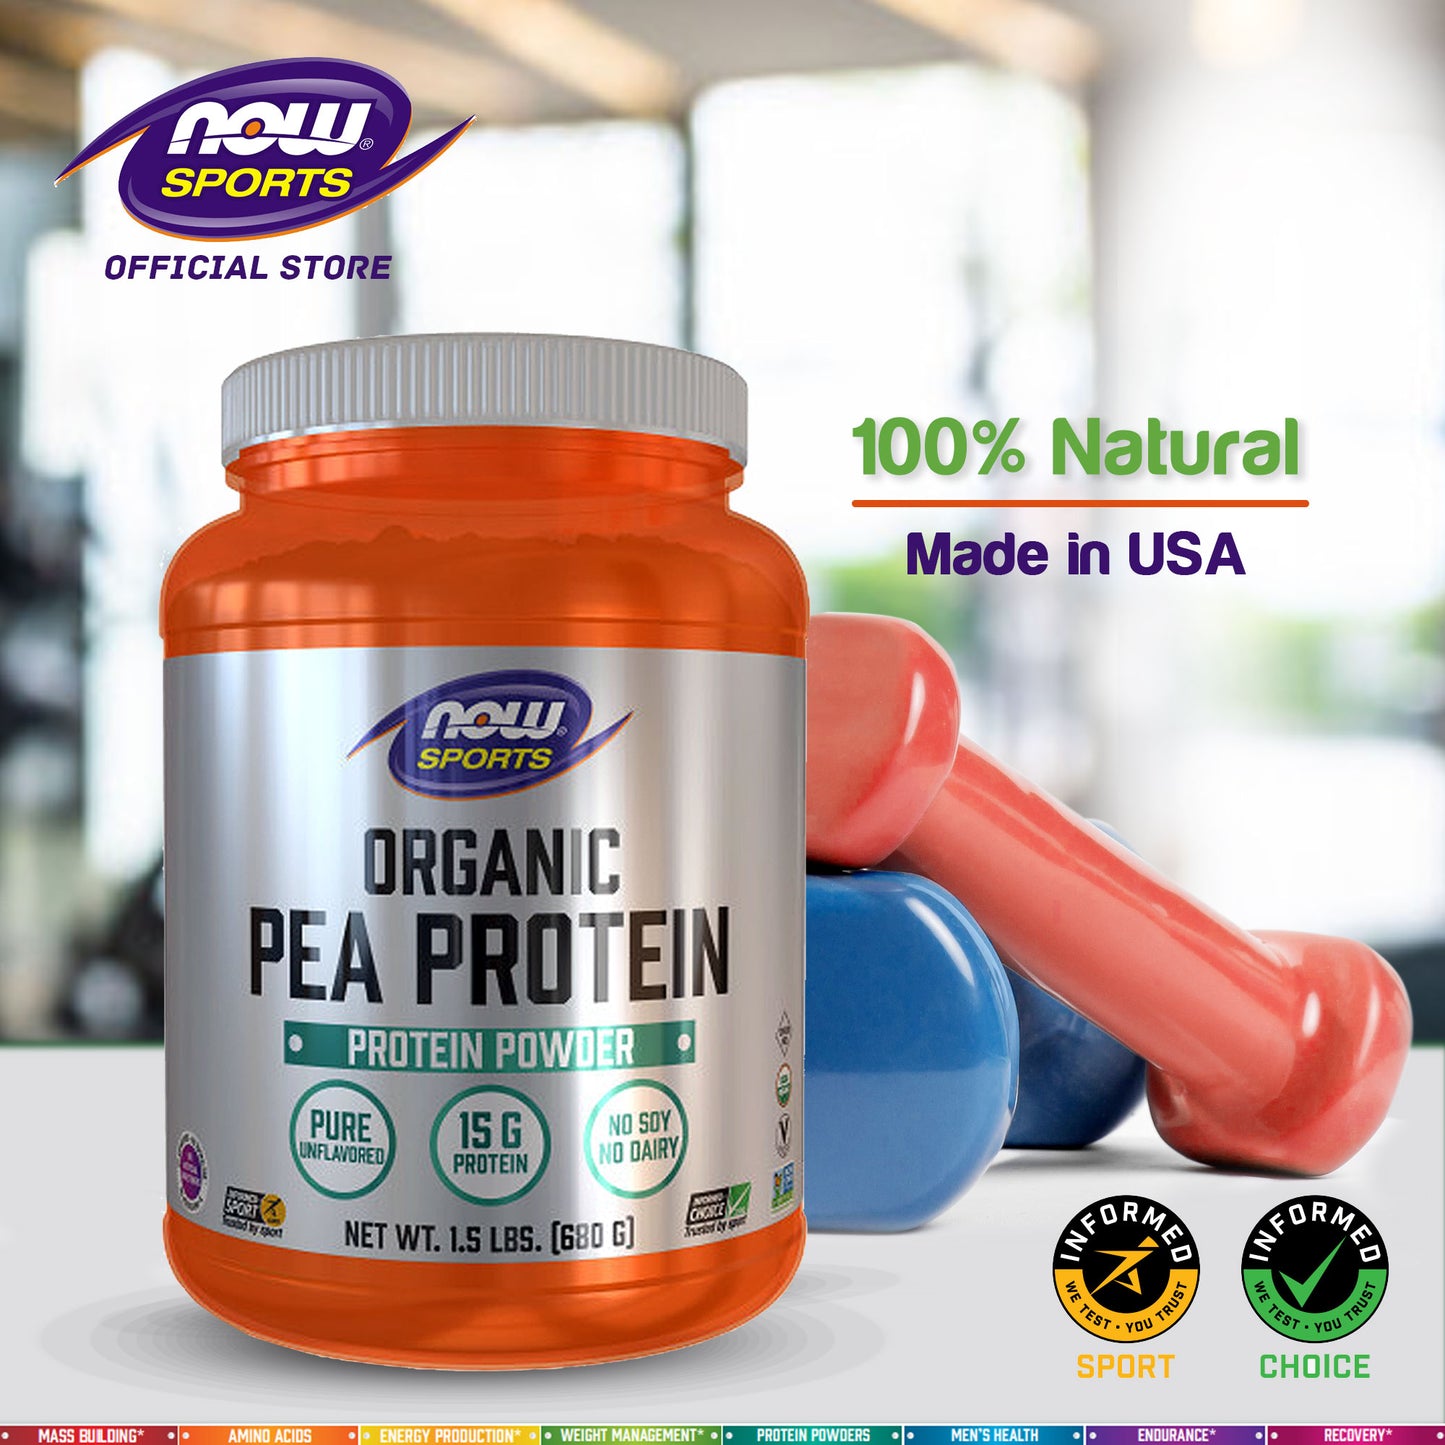 NOW Sports Nutrition, Certified Organic Pea Protein 15 Grams, Unflavored Powder, 1.5-Pound (680 g) - Bloom Concept